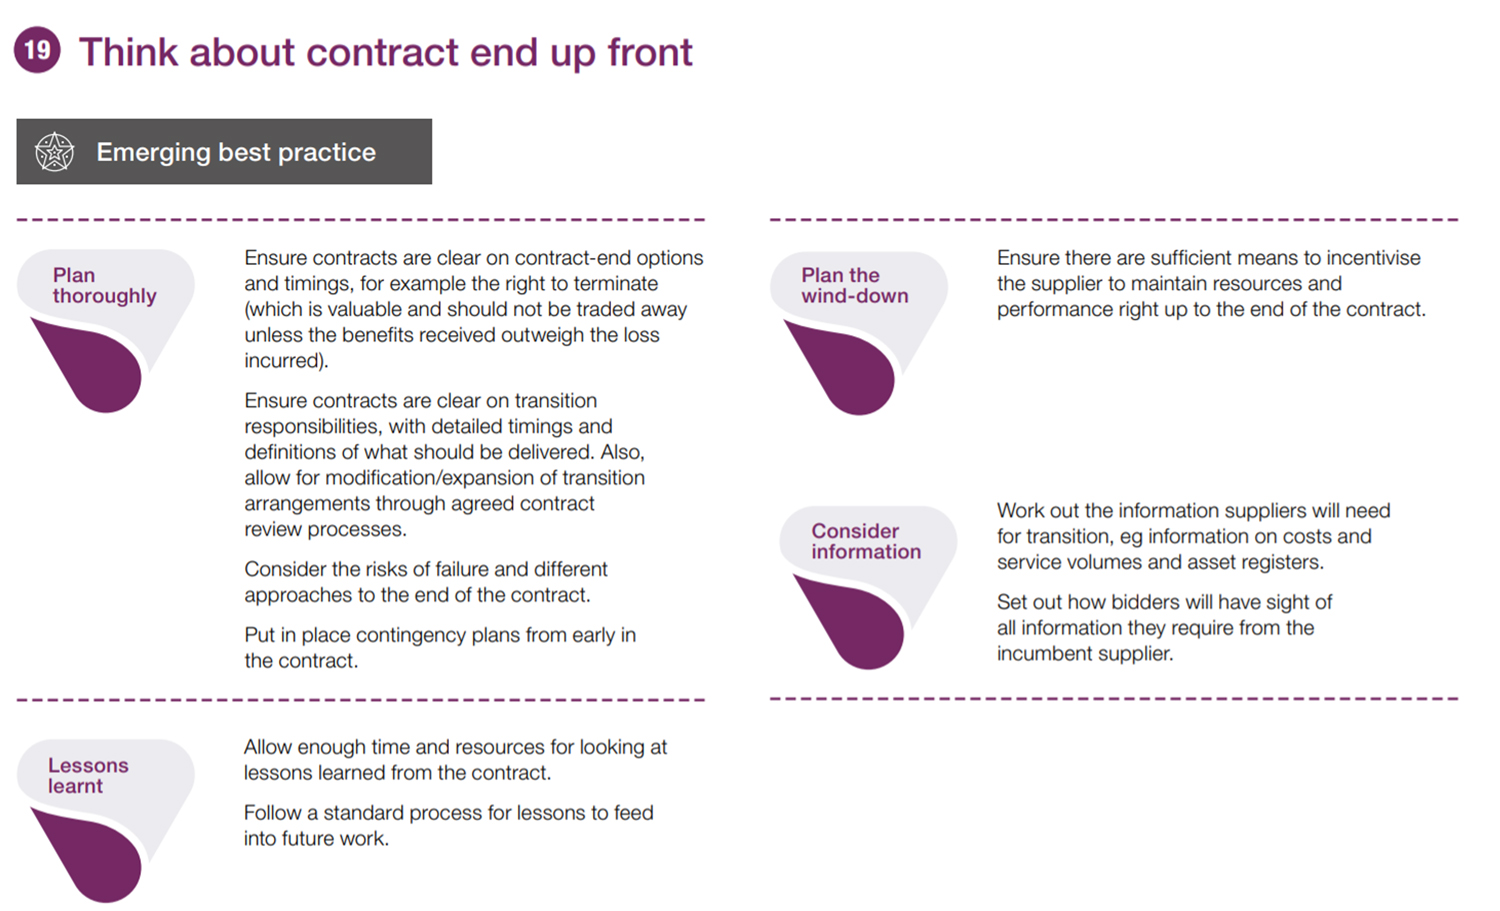 An image of contract planning insight 19 from NAO guide to commercial and contract management